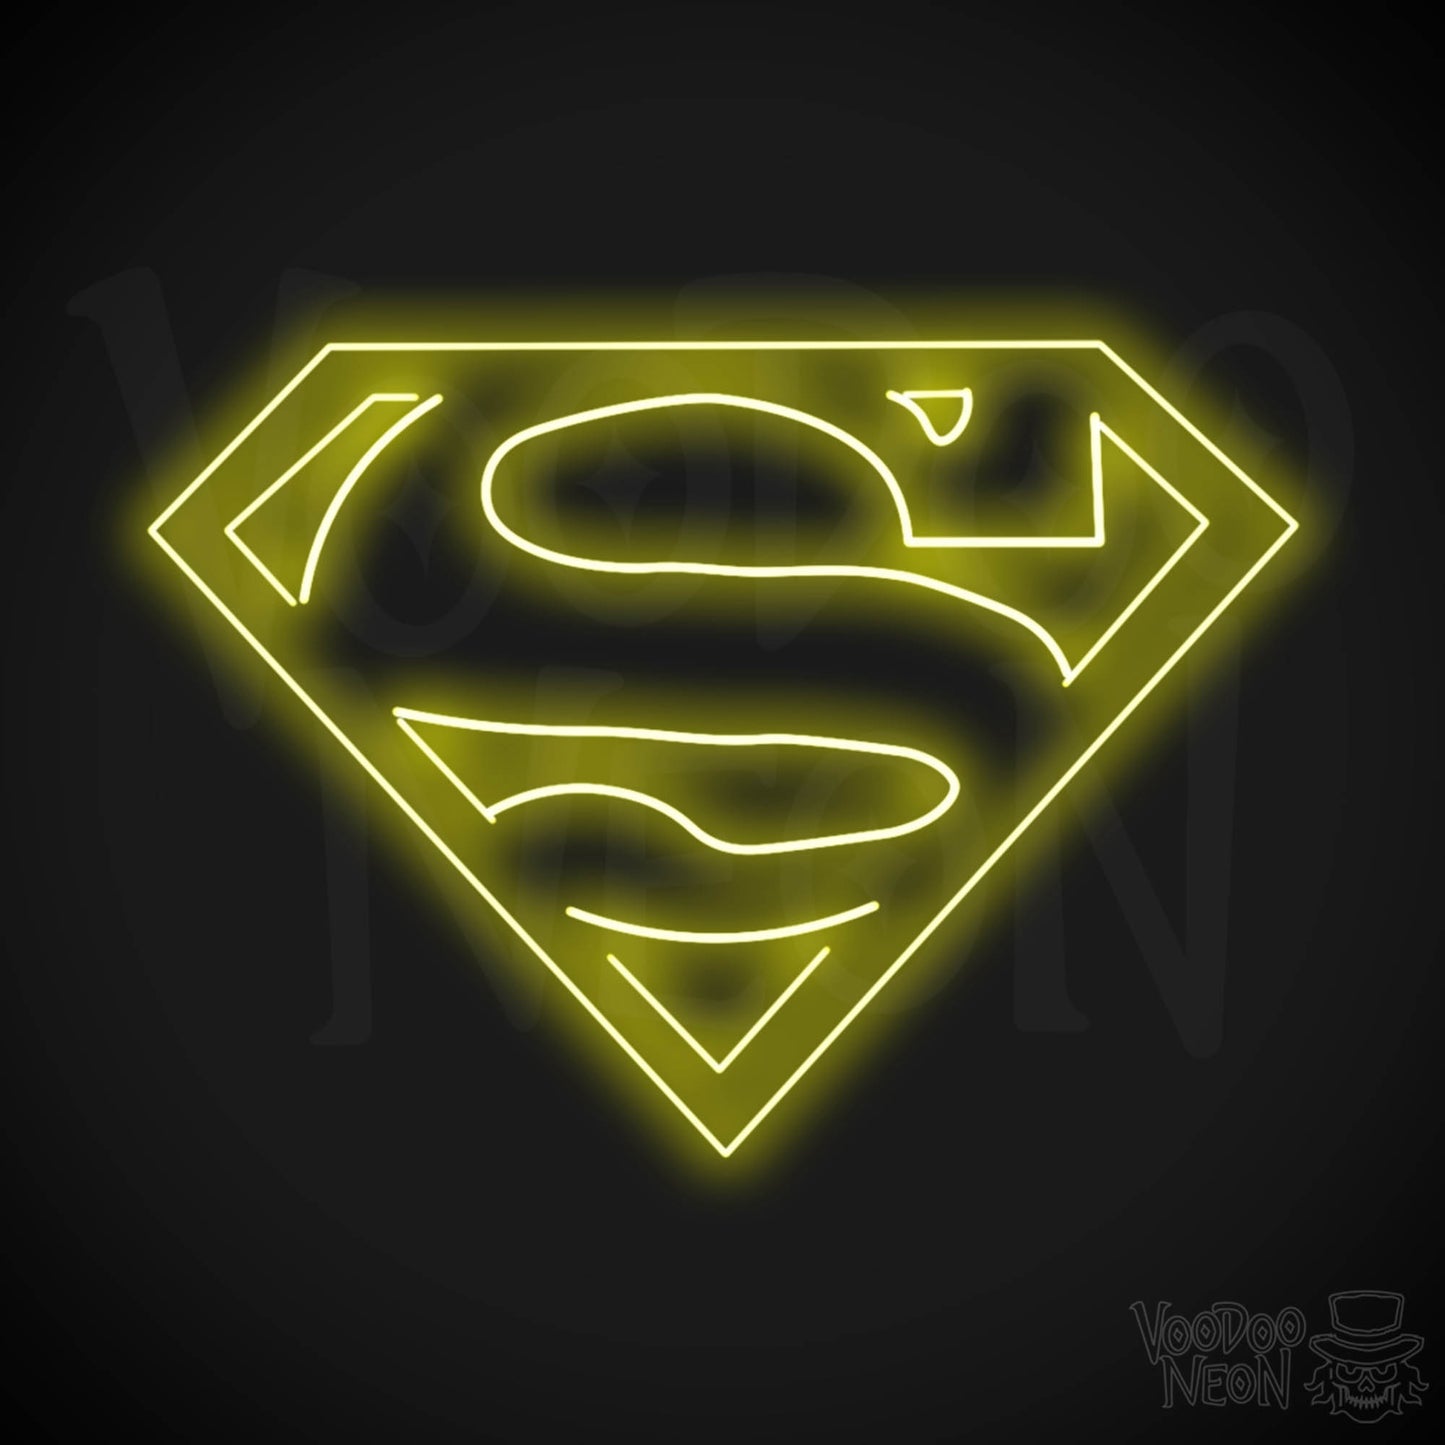 Neon Superman Sign - Superman Neon Sign - LED Wall Art - Color Yellow